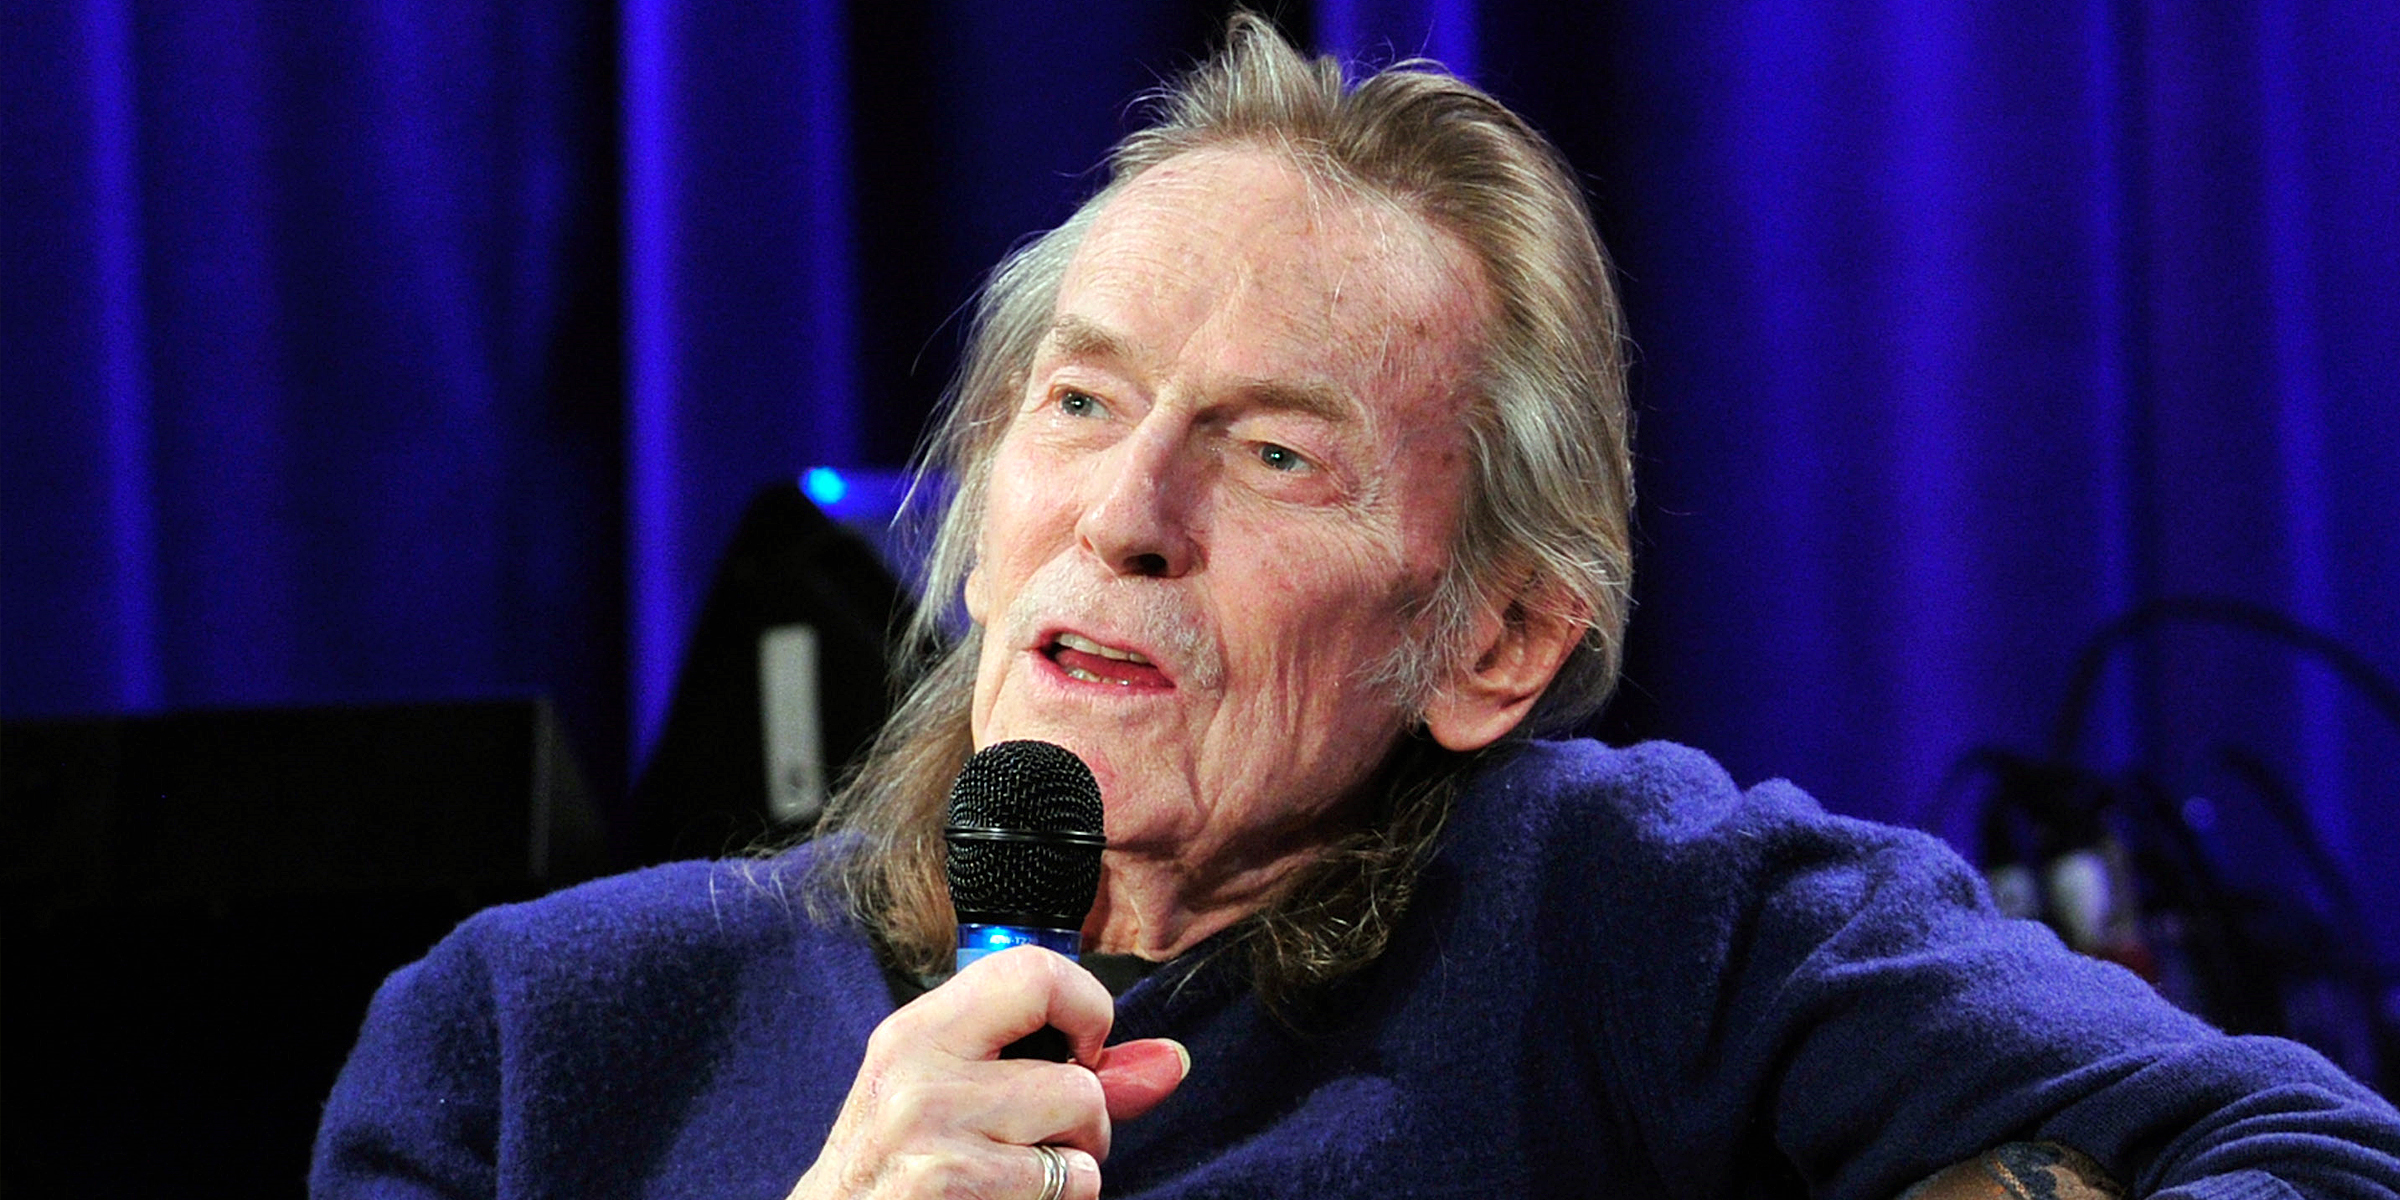 Gordon Lightfoot | Source: Getty Images